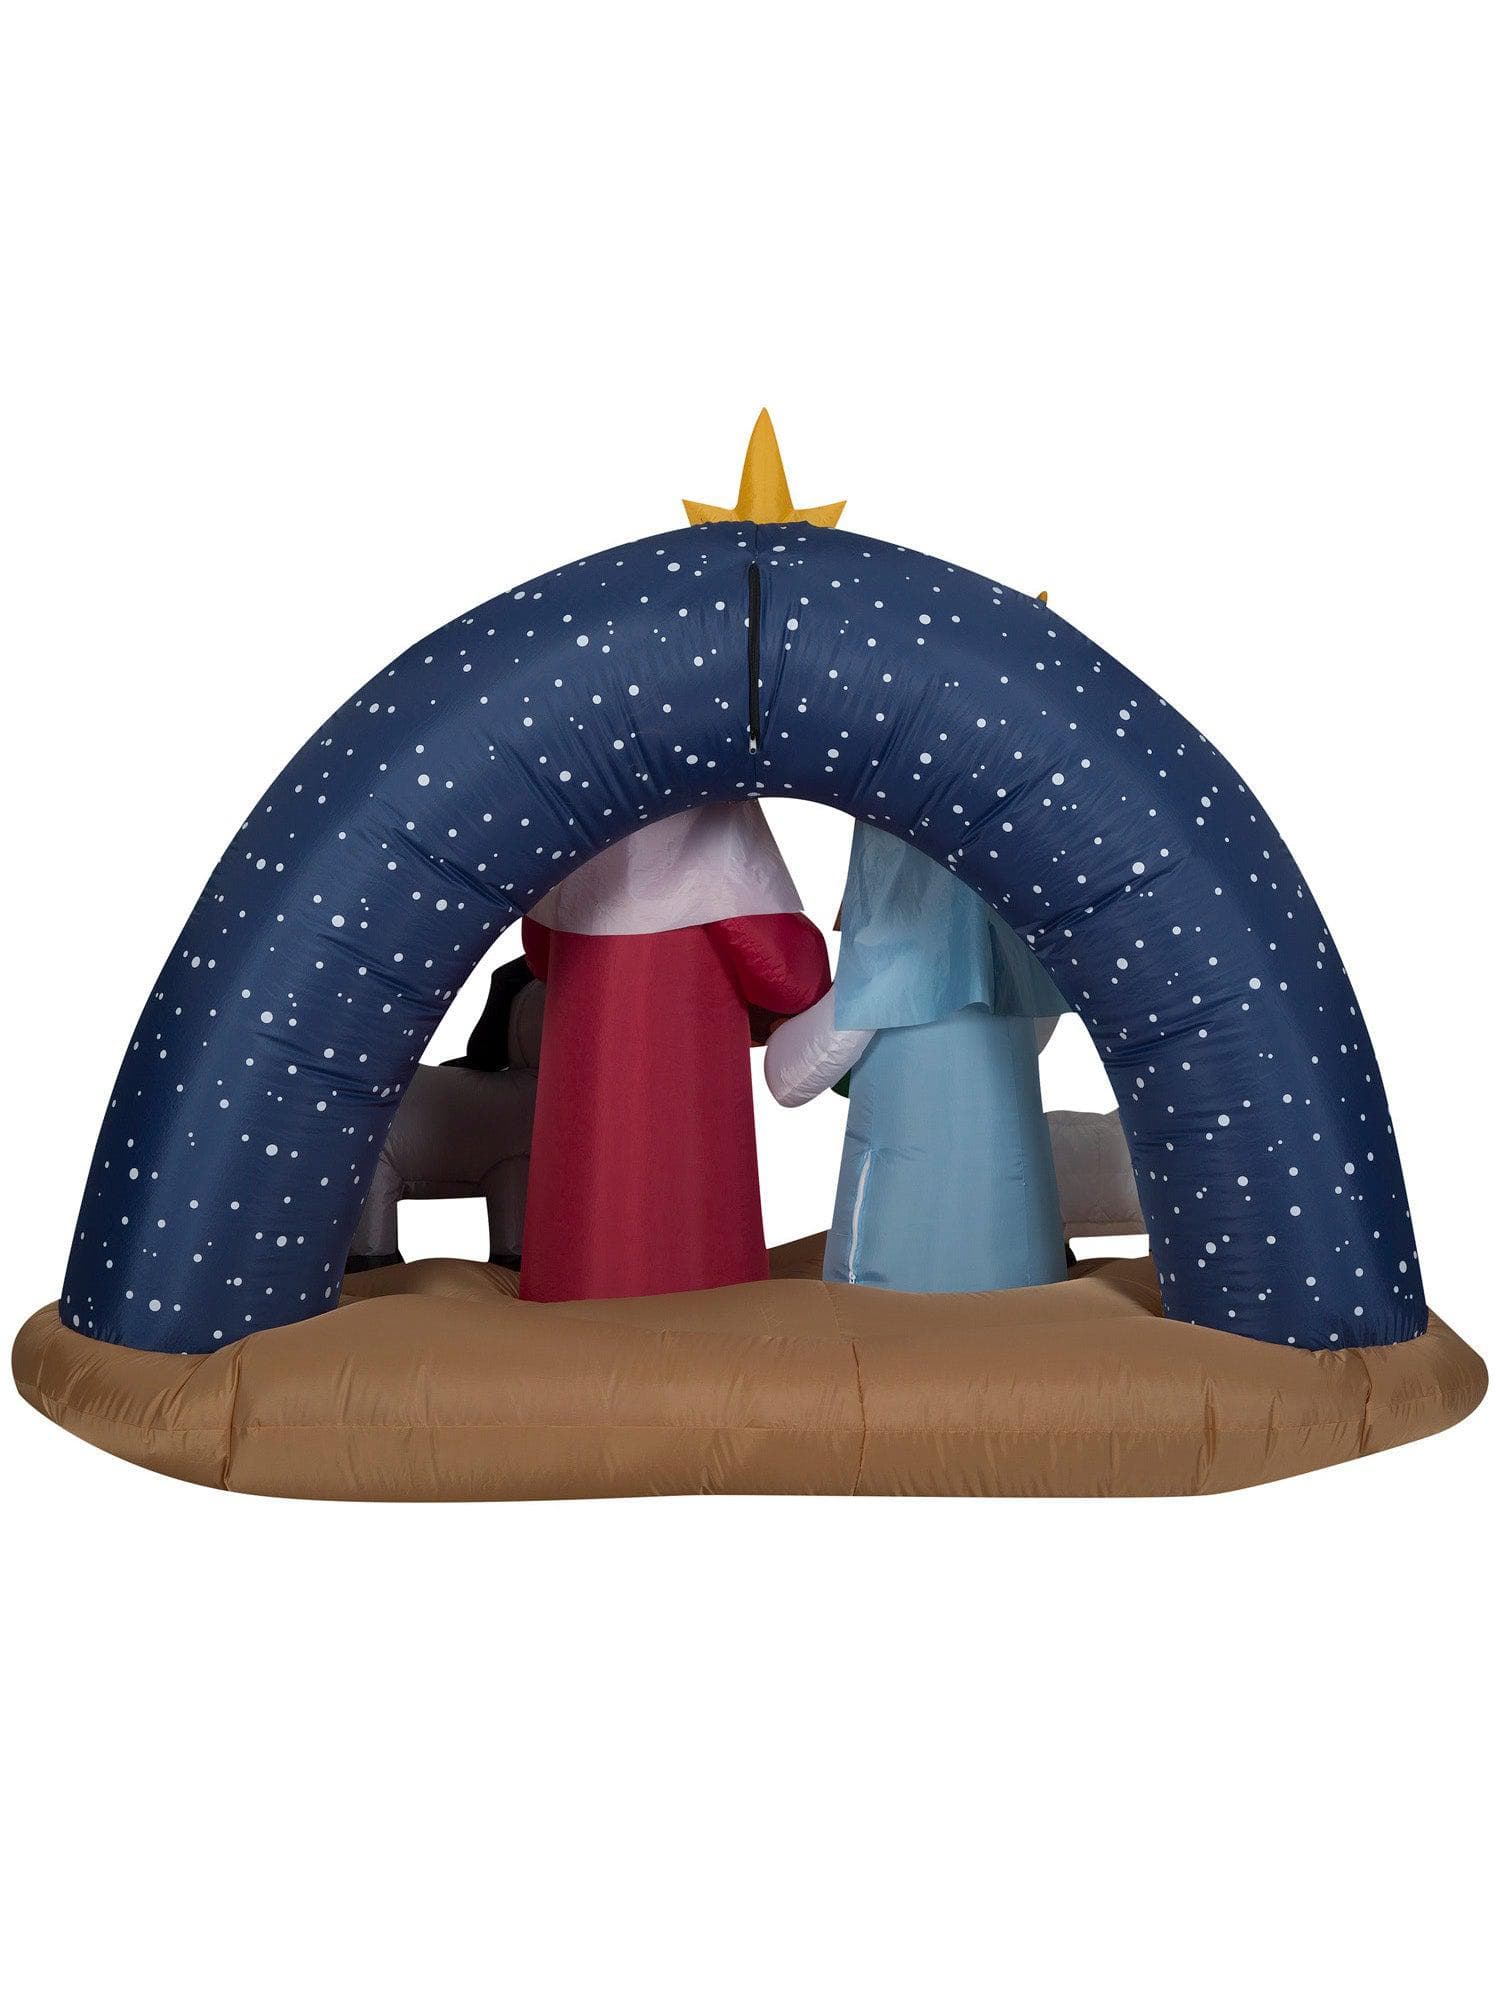 6.5 Foot Snowy Night Nativity Scene Light Up Christmas Inflatable Lawn Decor - costumes.com